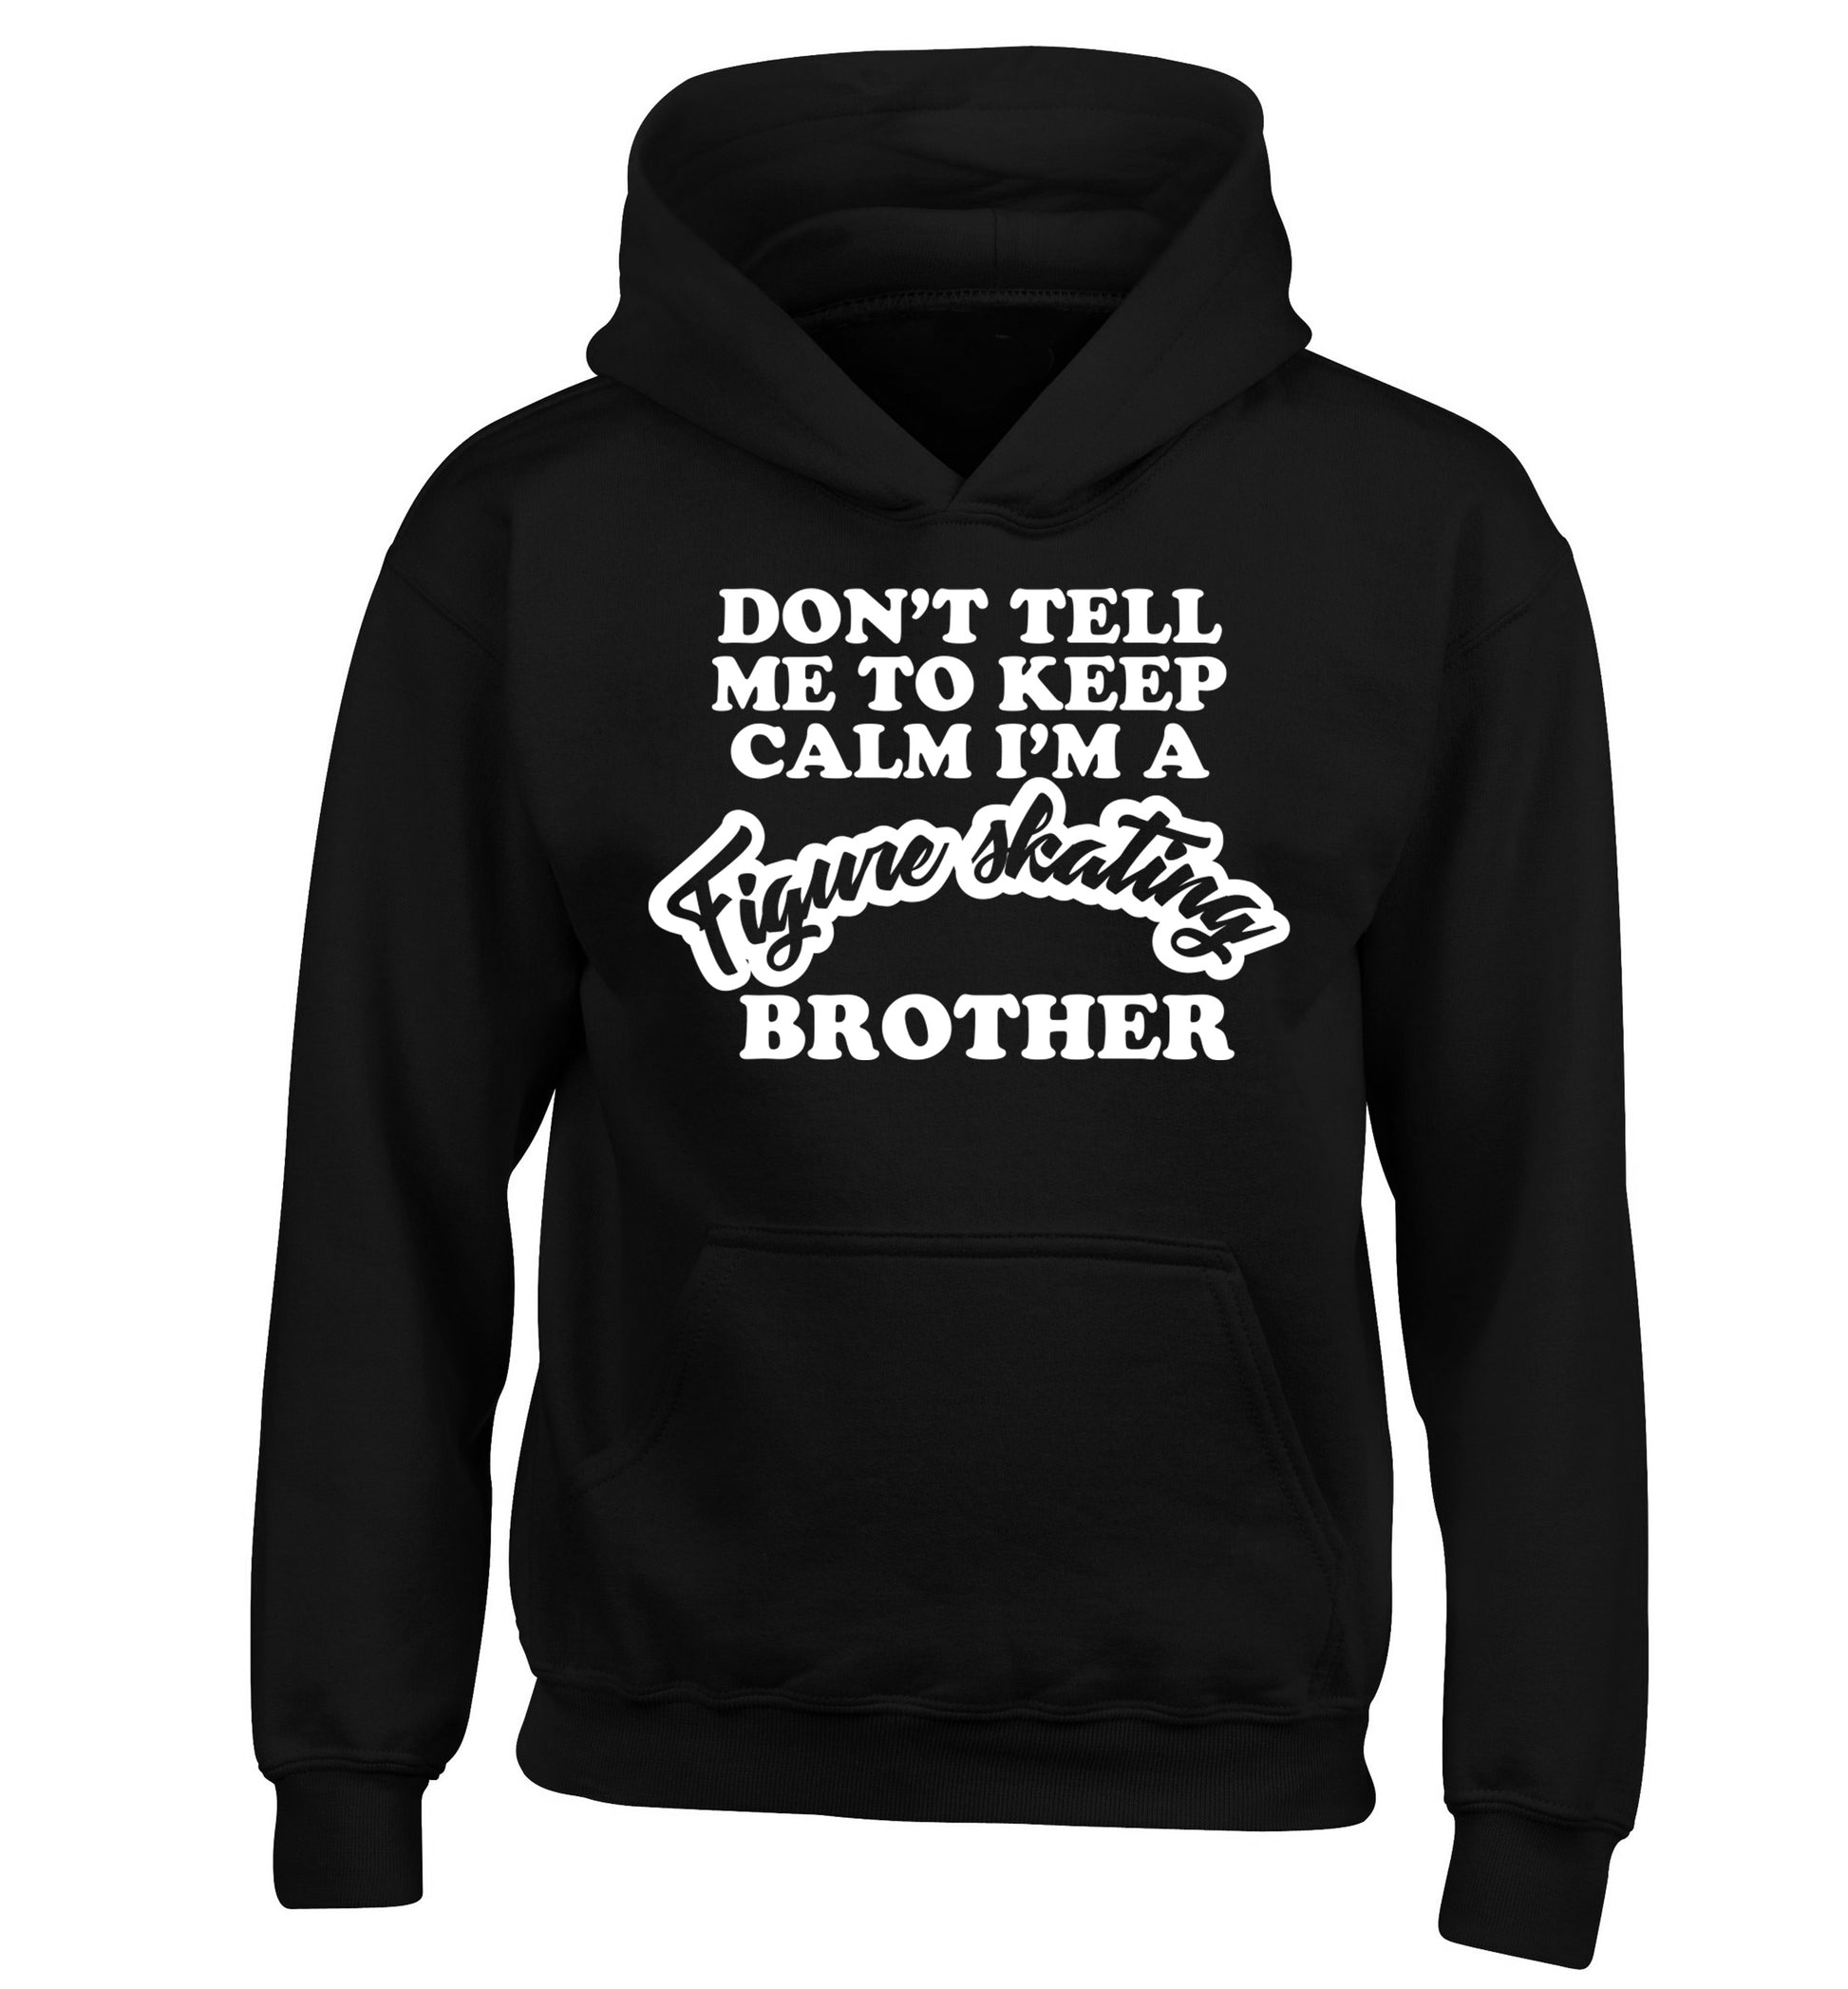 Don't tell me to keep calm I'm a figure skating brother children's black hoodie 12-14 Years